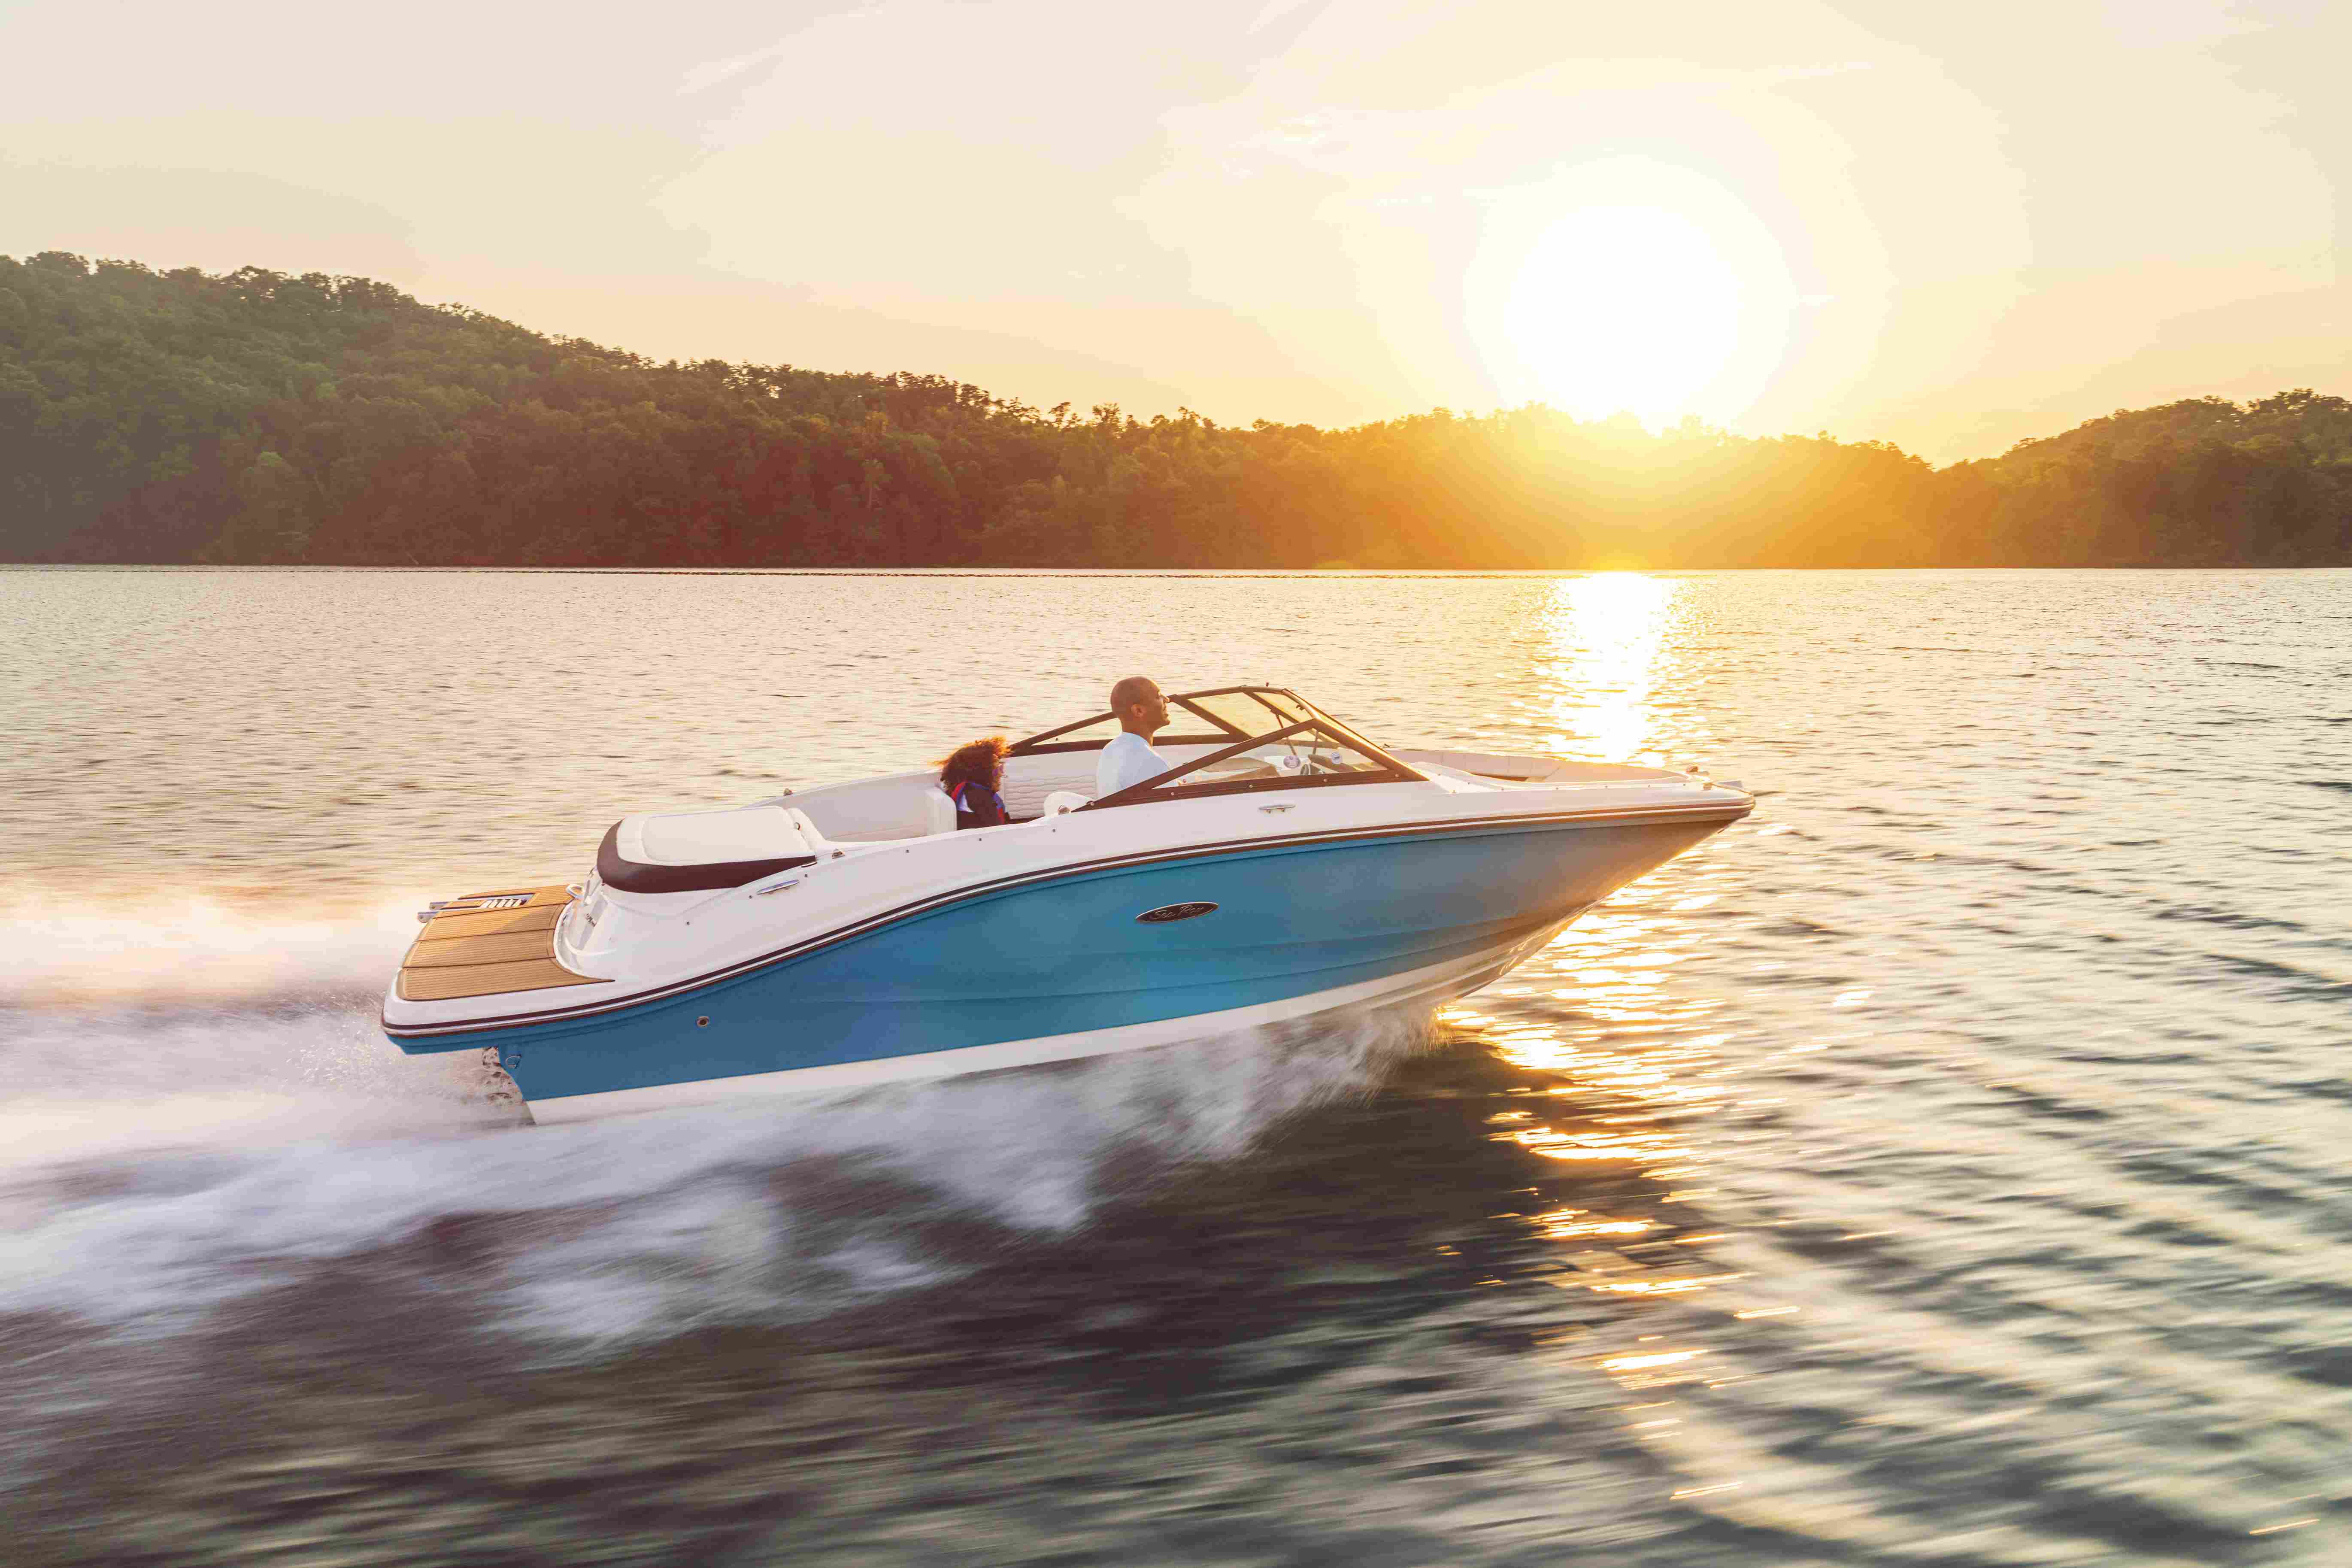 Special offer for the Sea Ray 190 SPX boat!